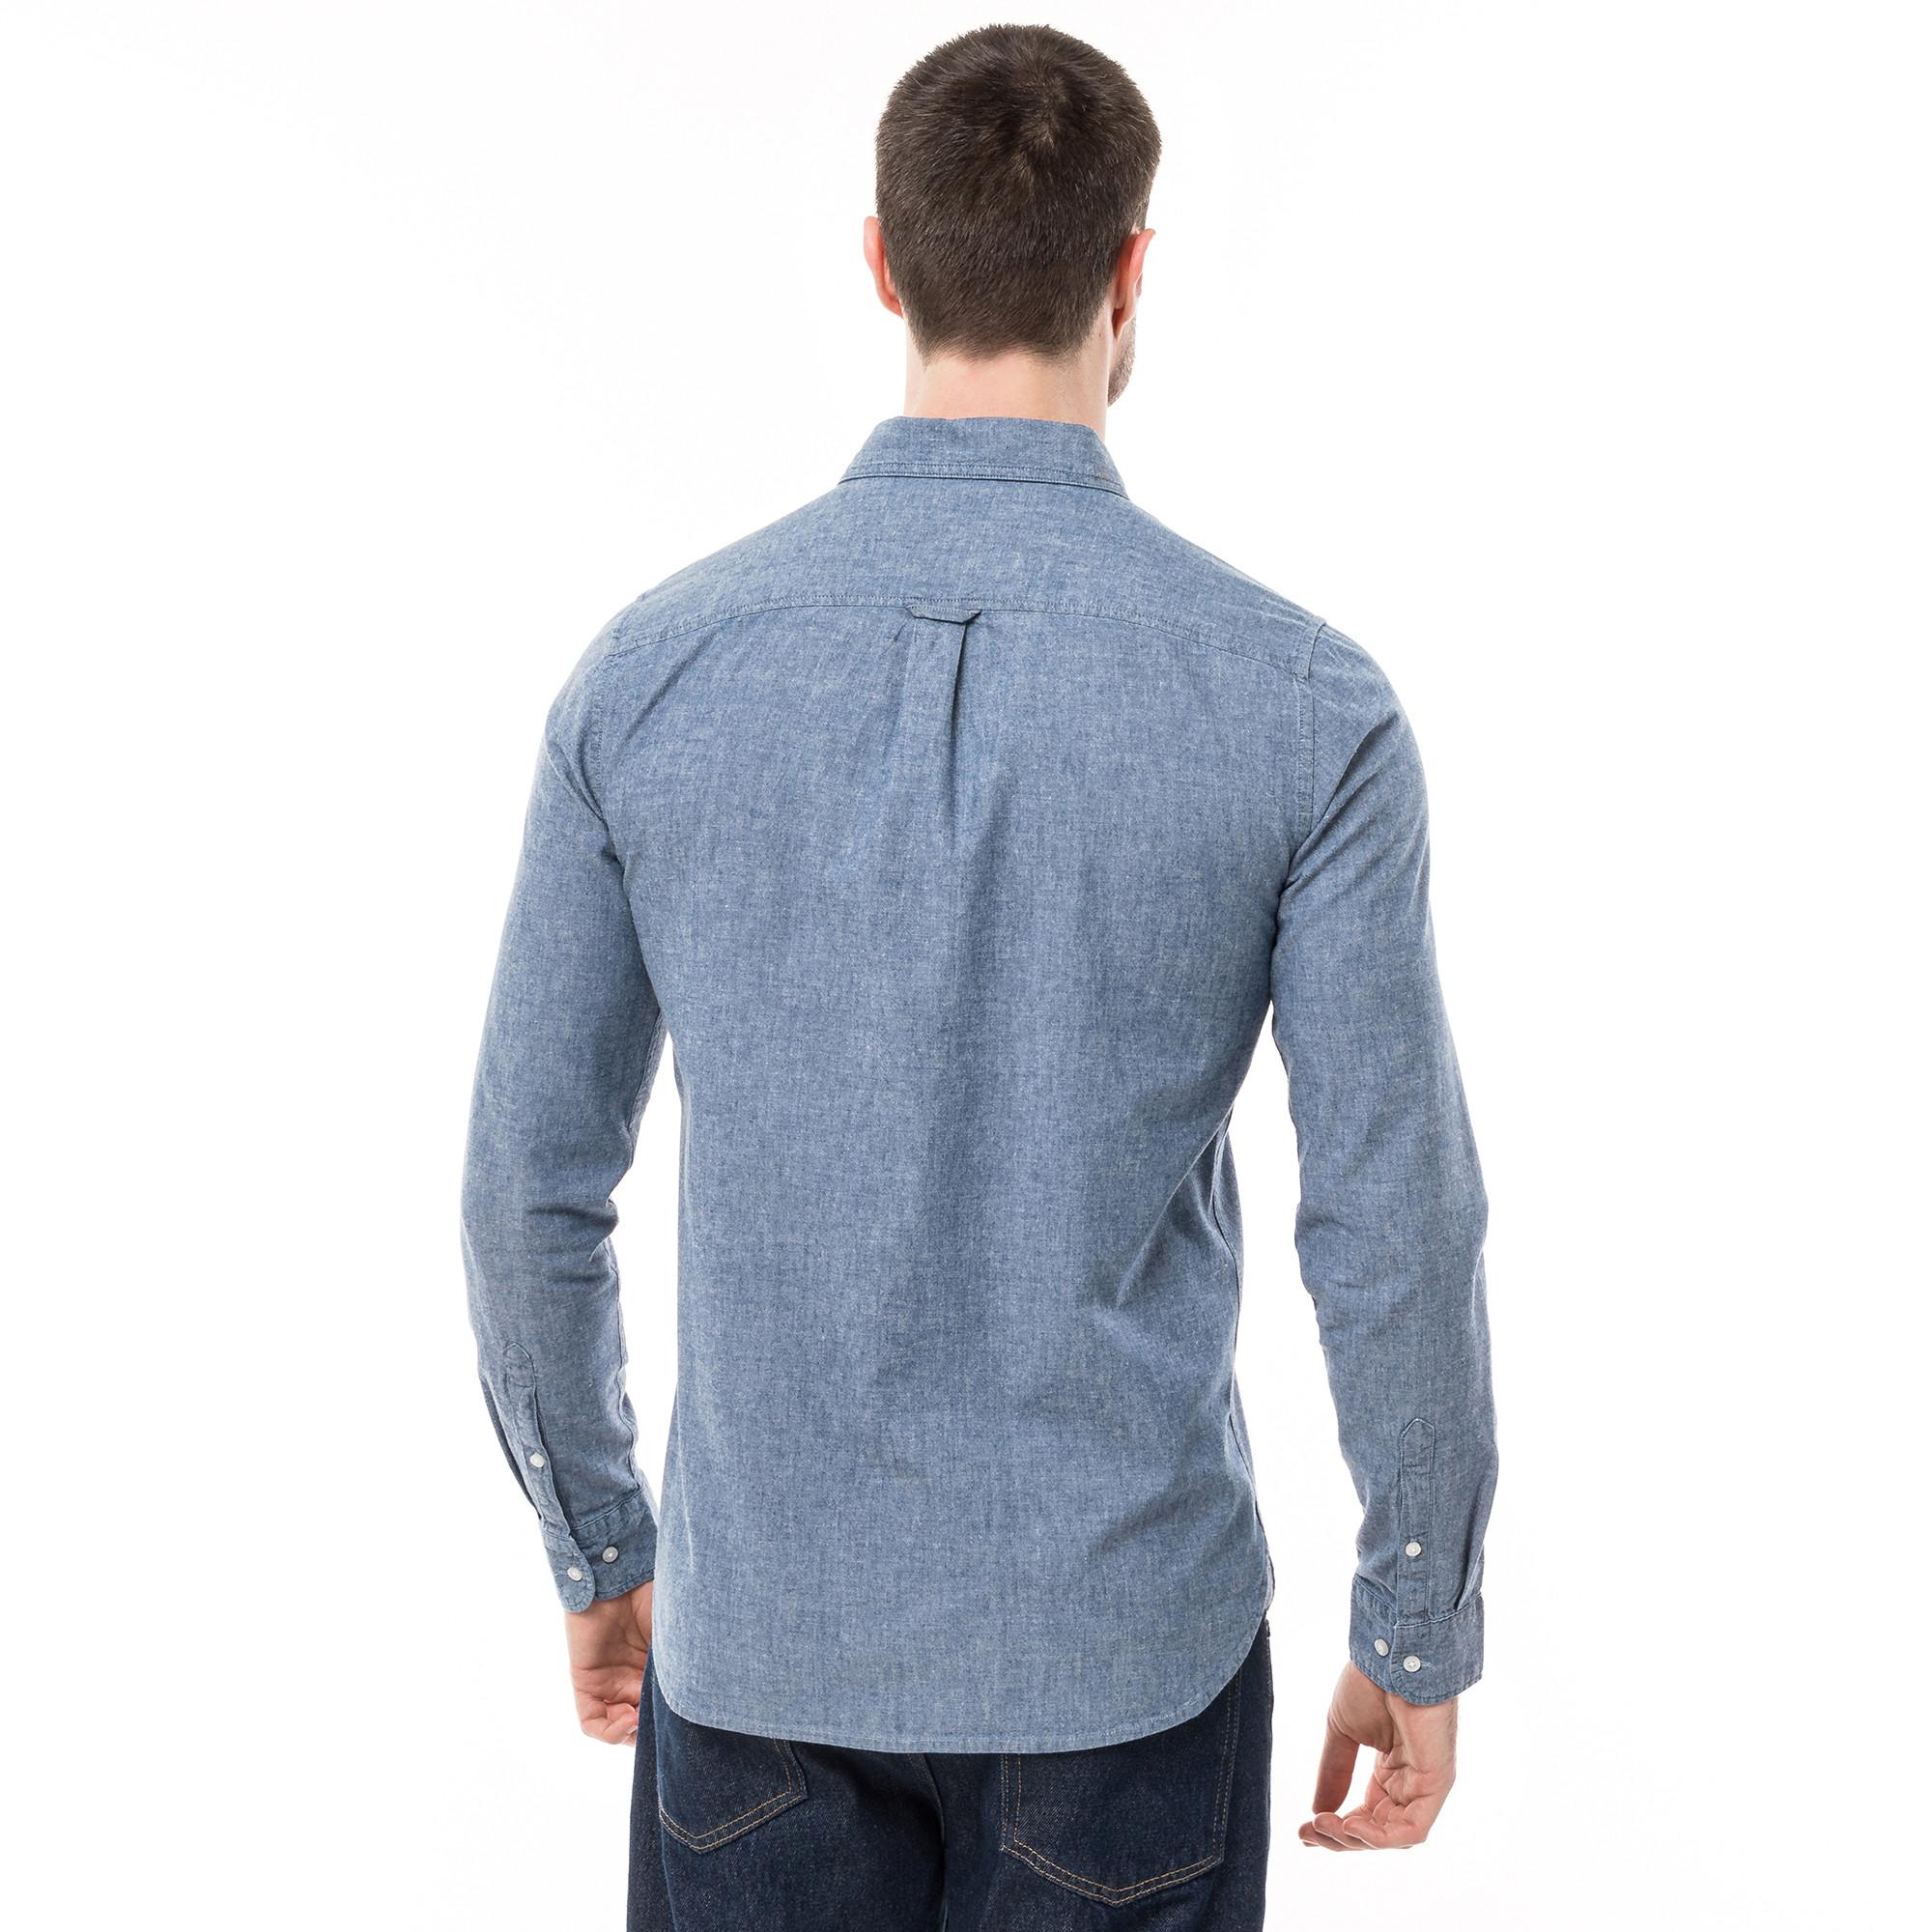 Superdry COTTON L/S CHAMBRAY SHIRT Chemise, manches longues 